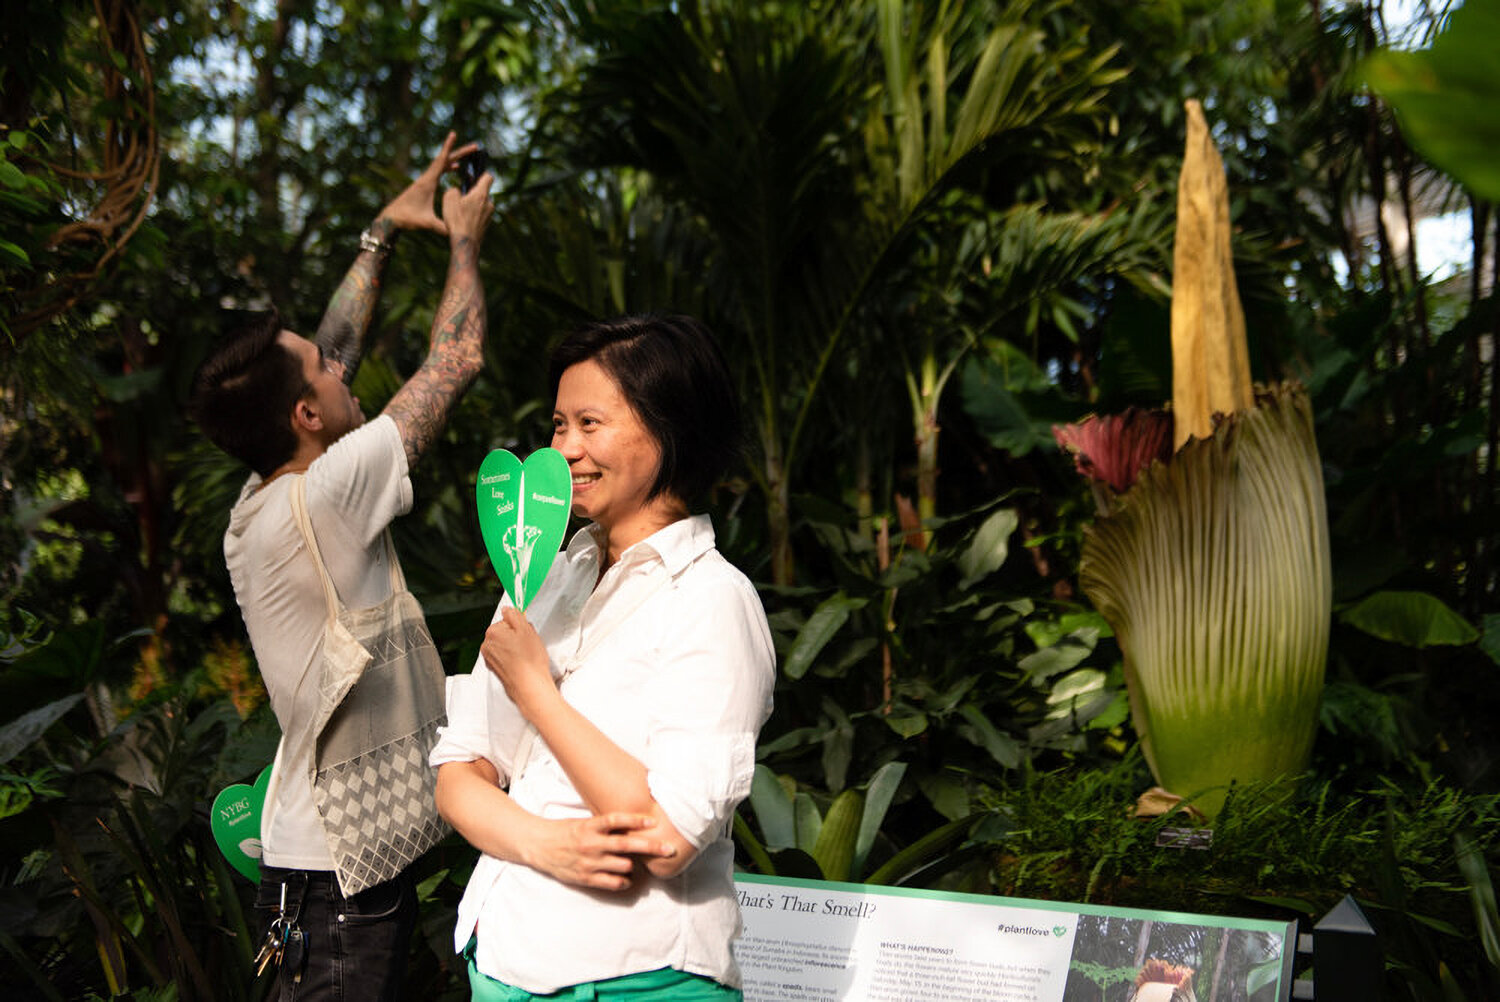 Despite its foul smell, the corpse flower at the New York Botanical Garden managed to attract throngs of visitors who endured the stench for the sake of pictures. A group of electeds and residents want city dwellers to gain free access to the garden as part of a 19th century agreement that has not been enforced.